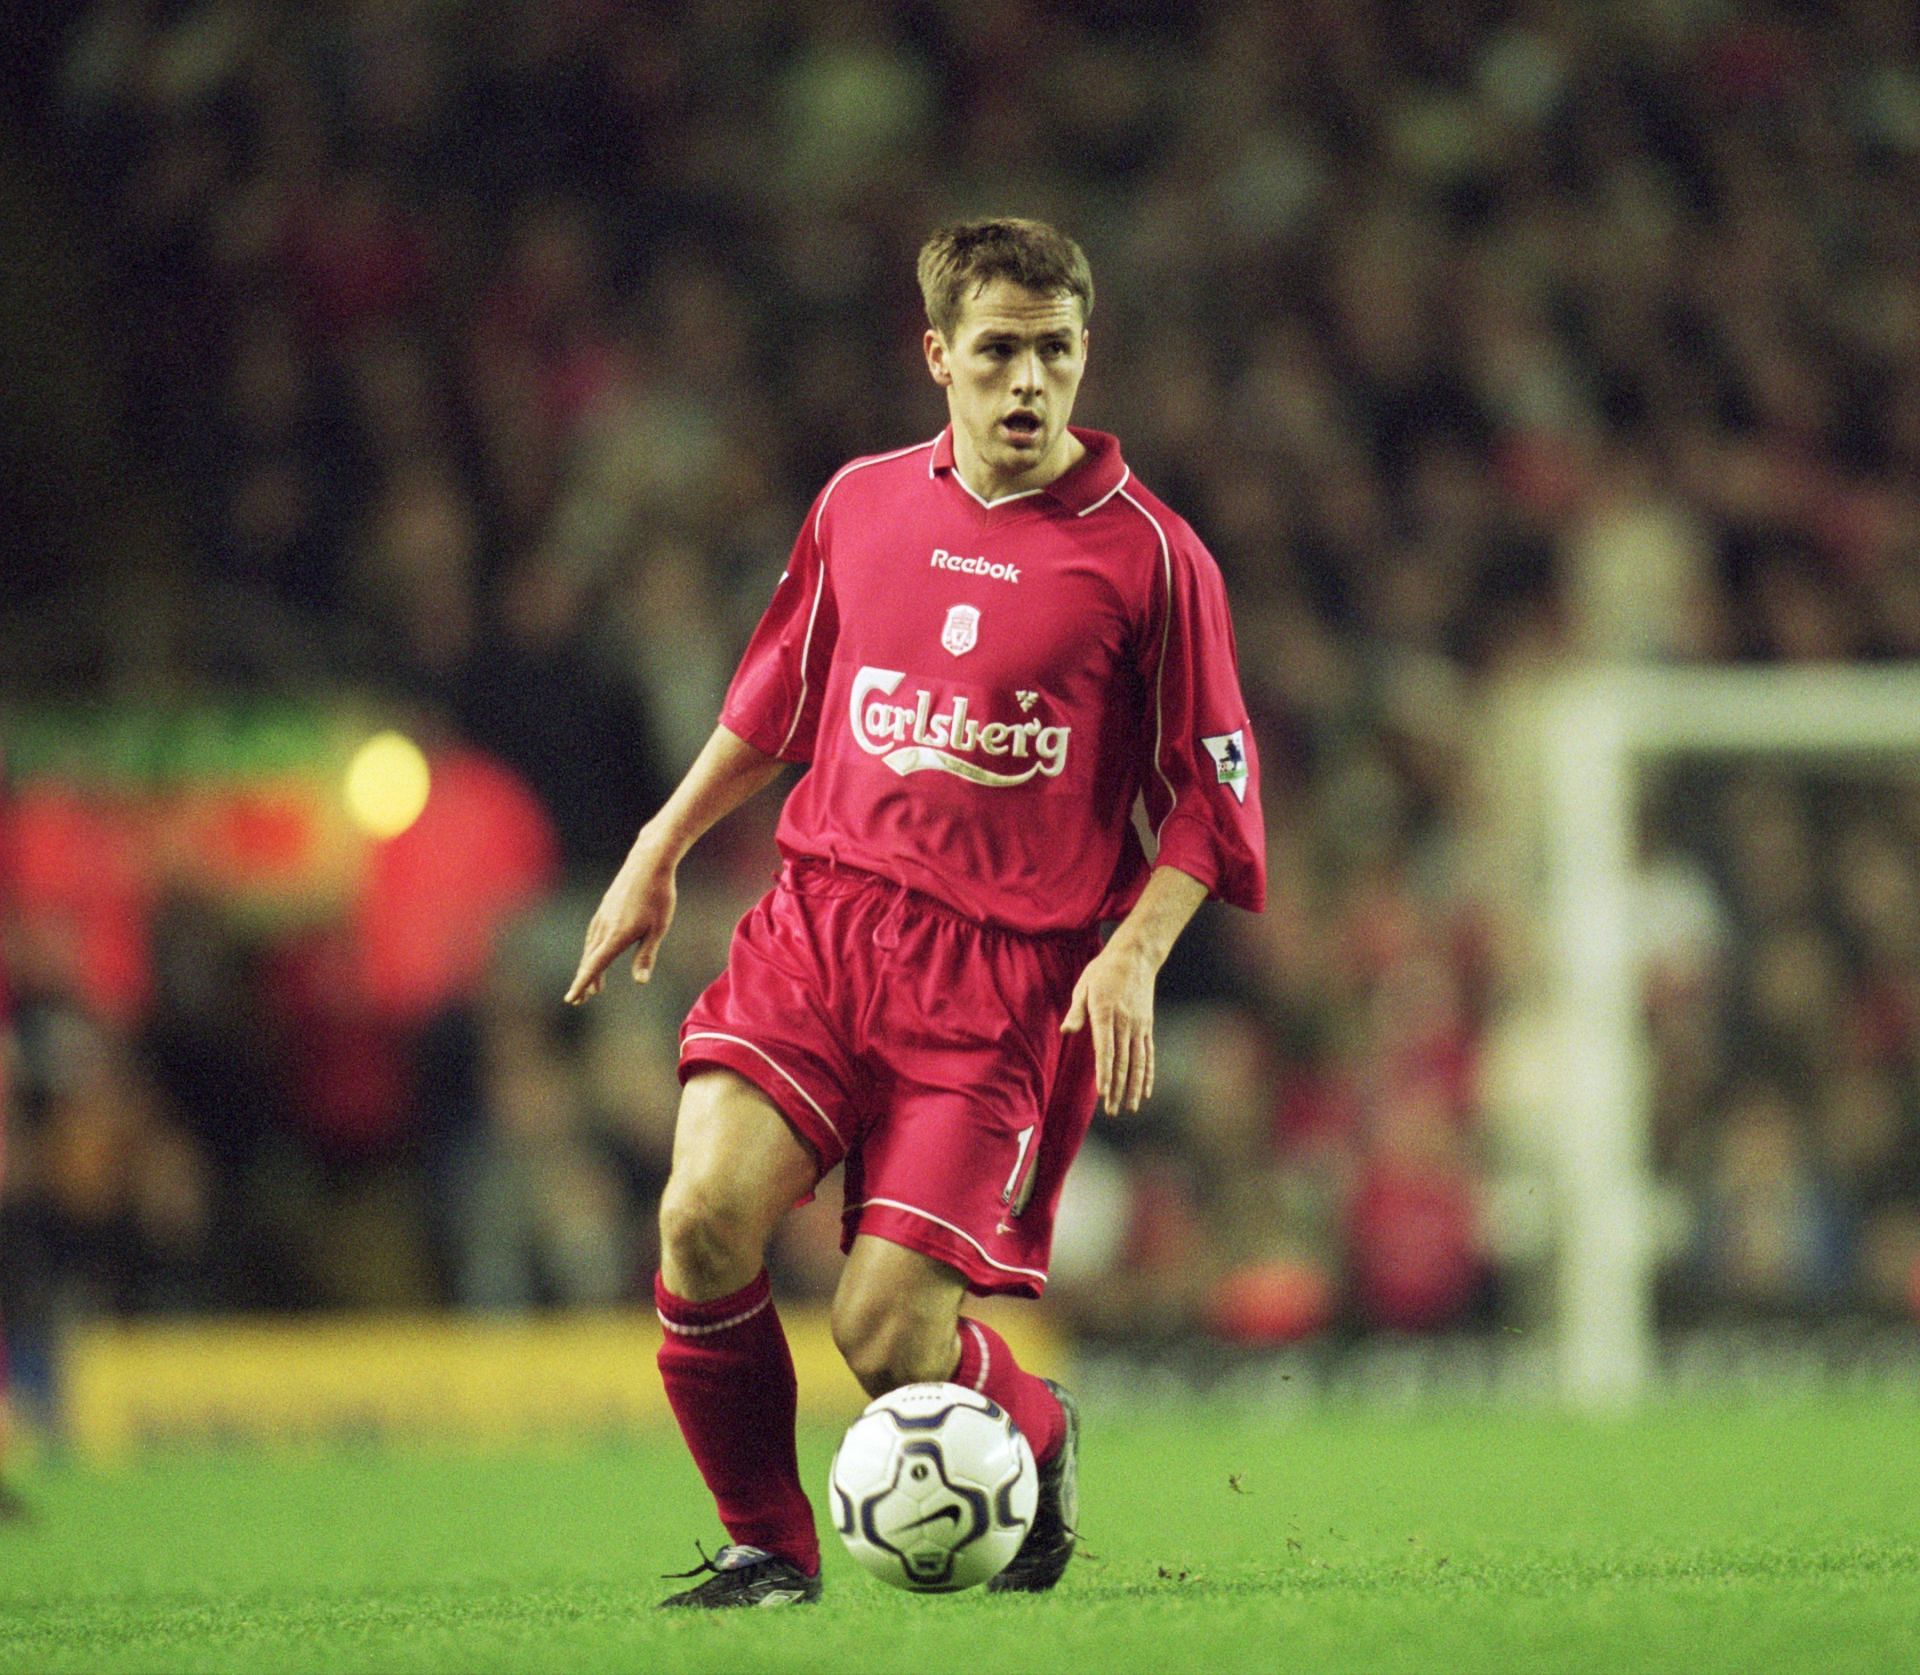 Michael Owen remains the last English player to win the Ballon d&#039;Or award.